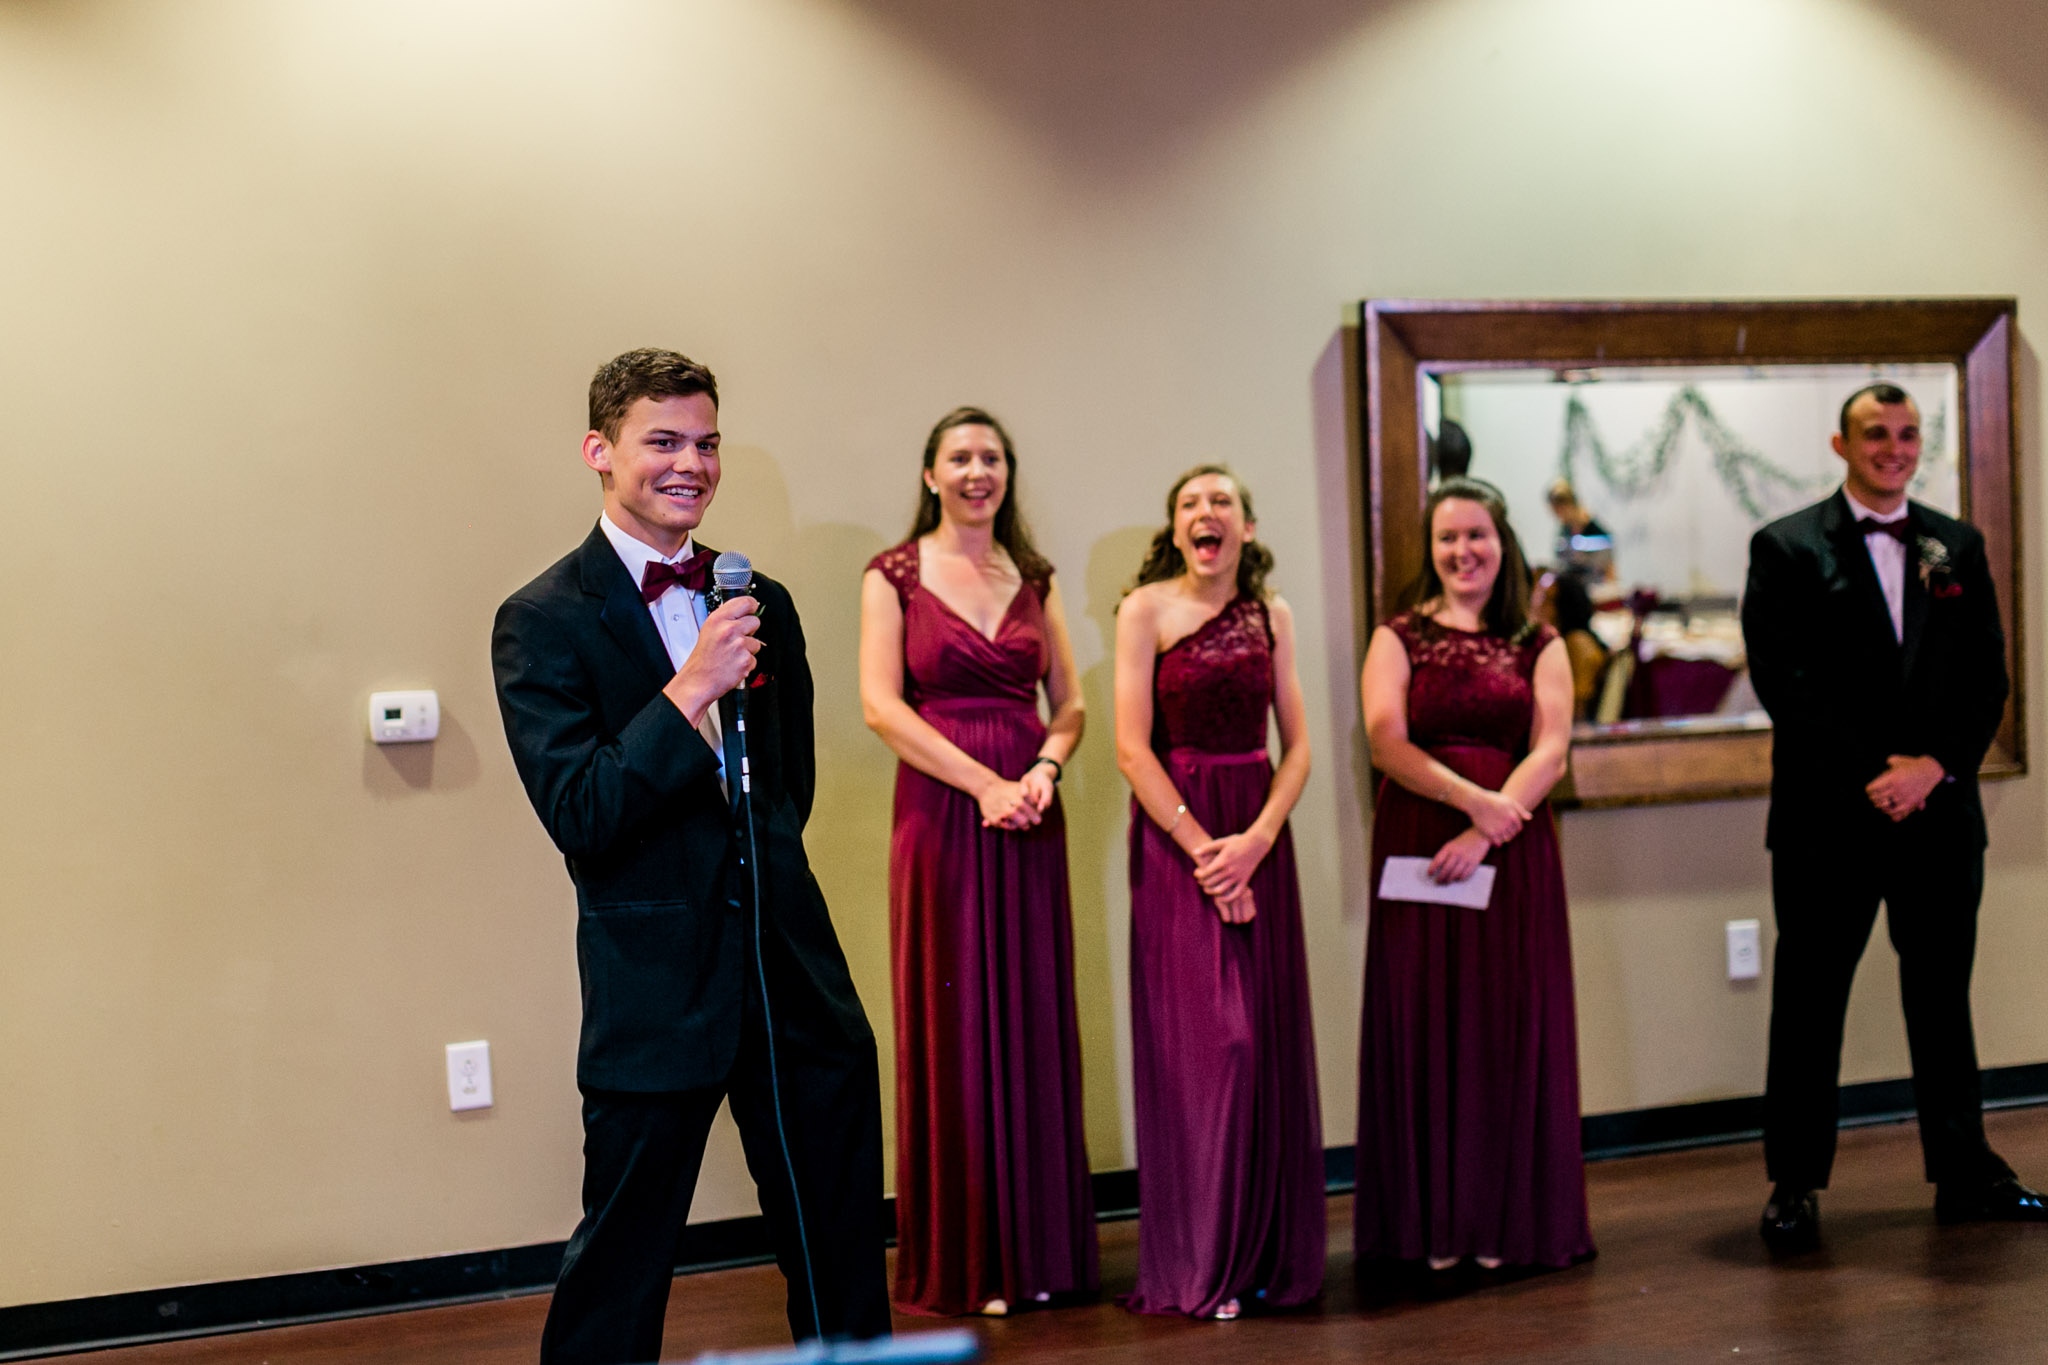 Groomsmen giving toast at wedding reception | Royal Banquet Conference Center | Raleigh Wedding Photographer | By G. Lin Photography